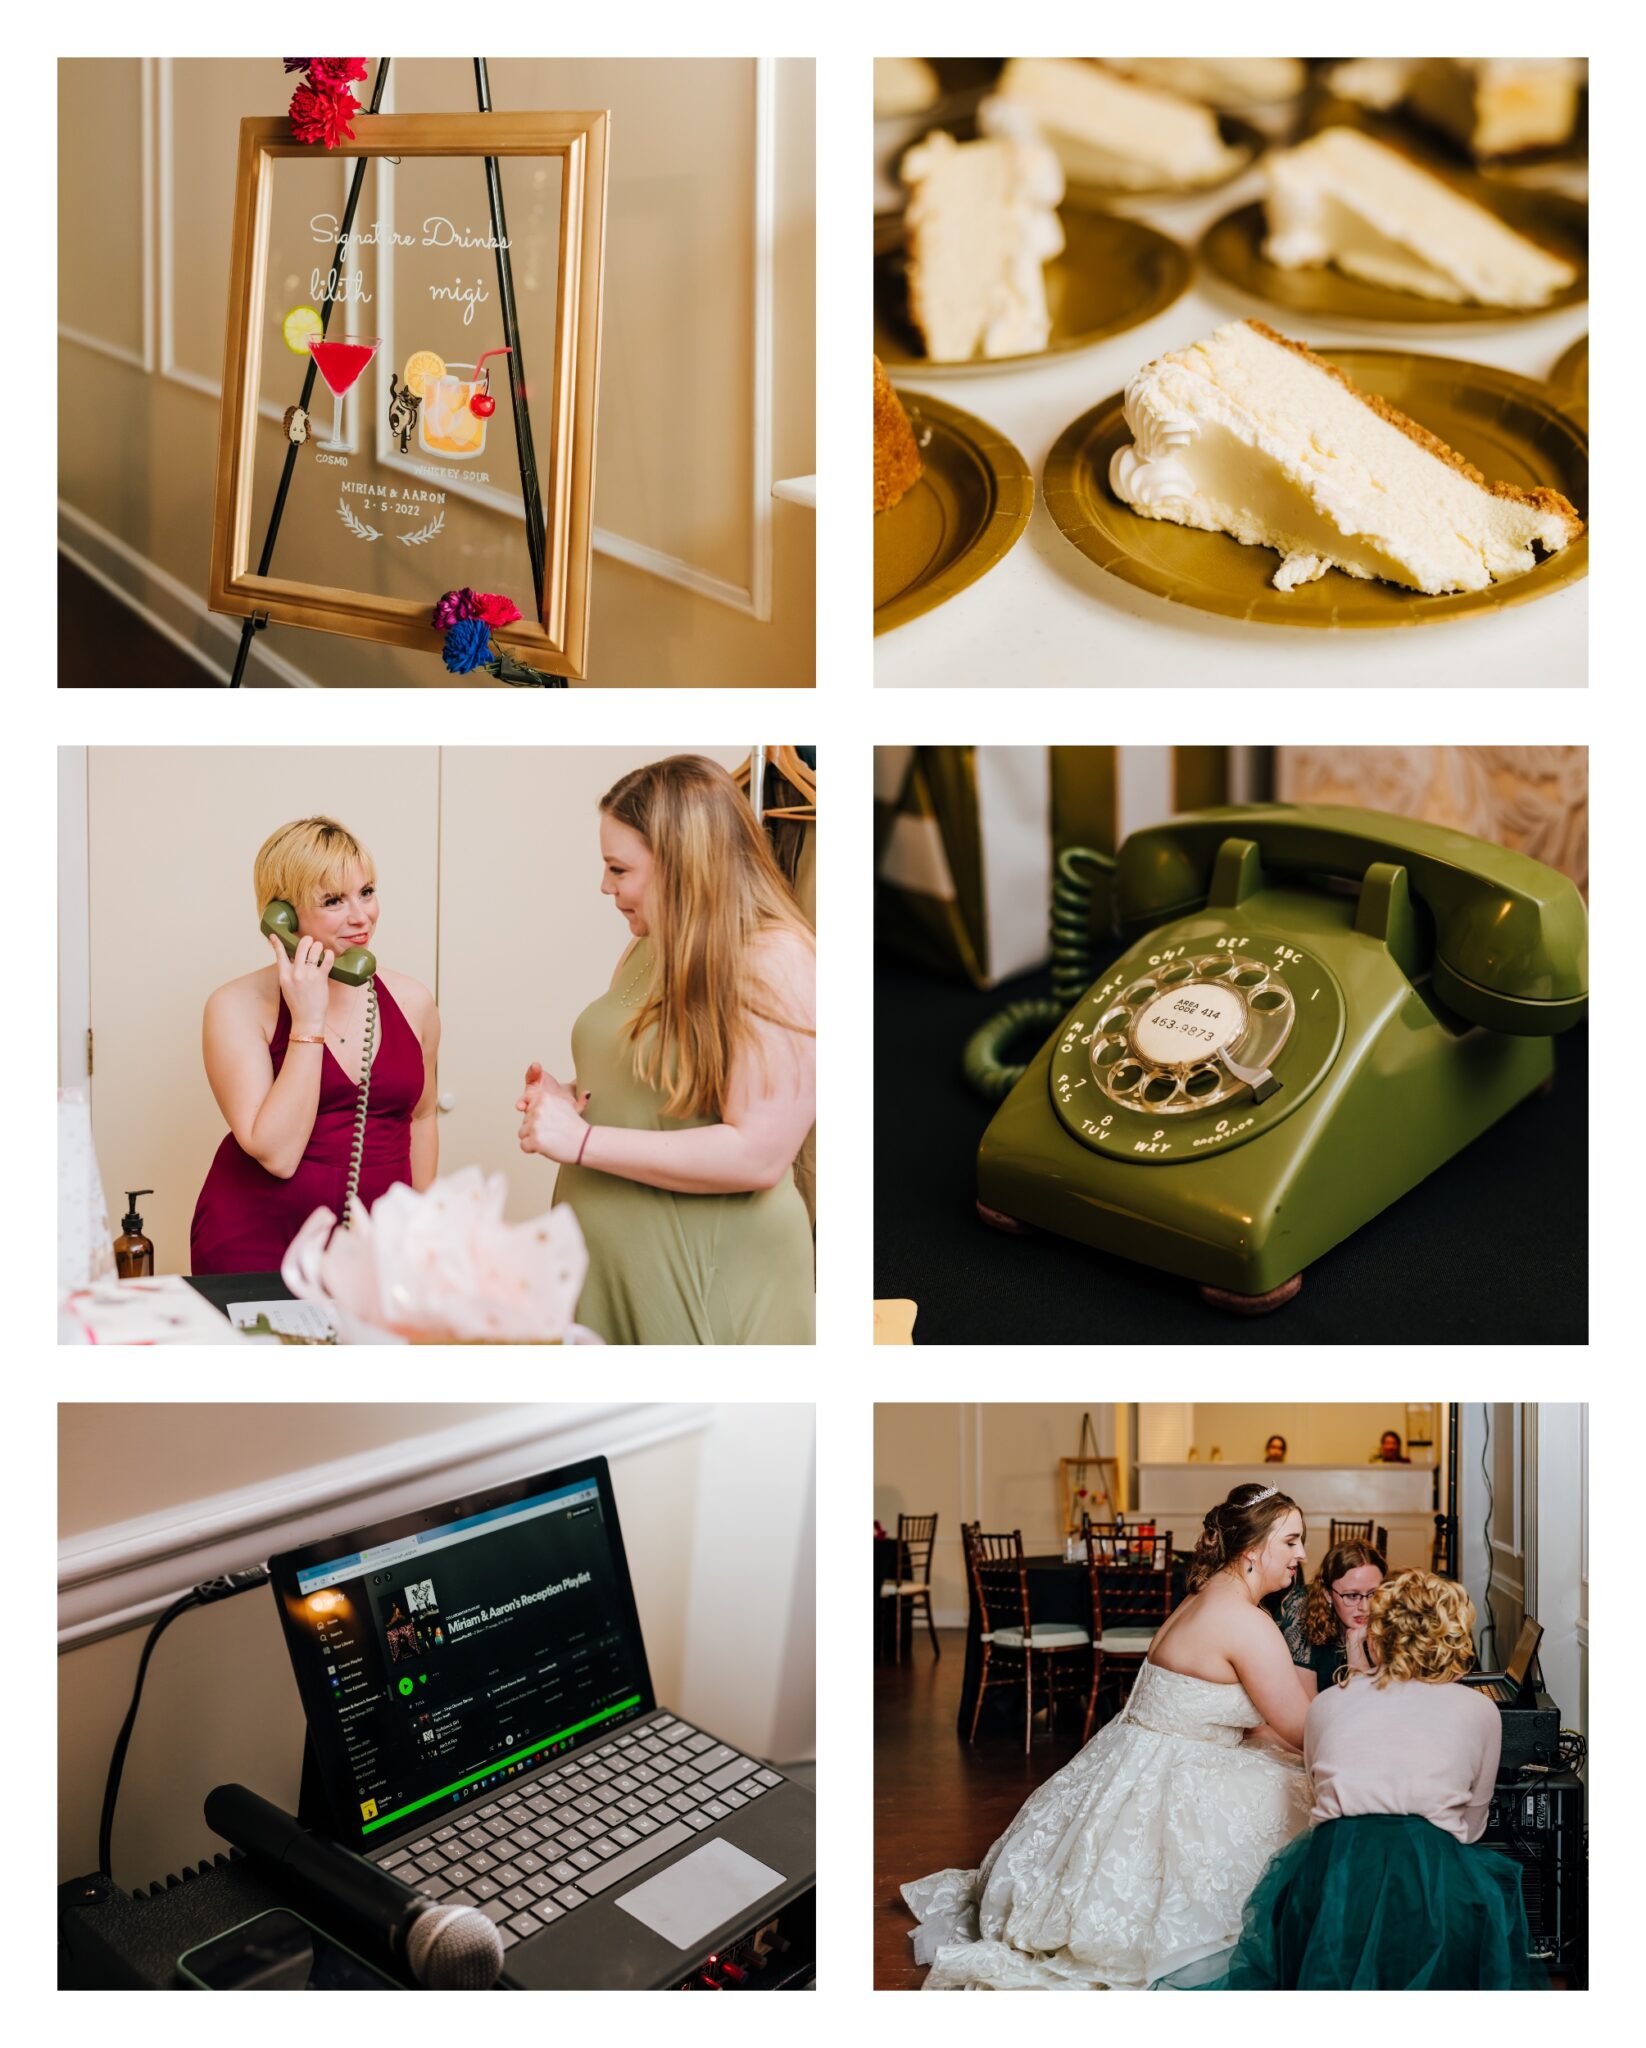 Personalized details including cheesecake, after the tone wedding voicemails, a playlist, and custom cocktails